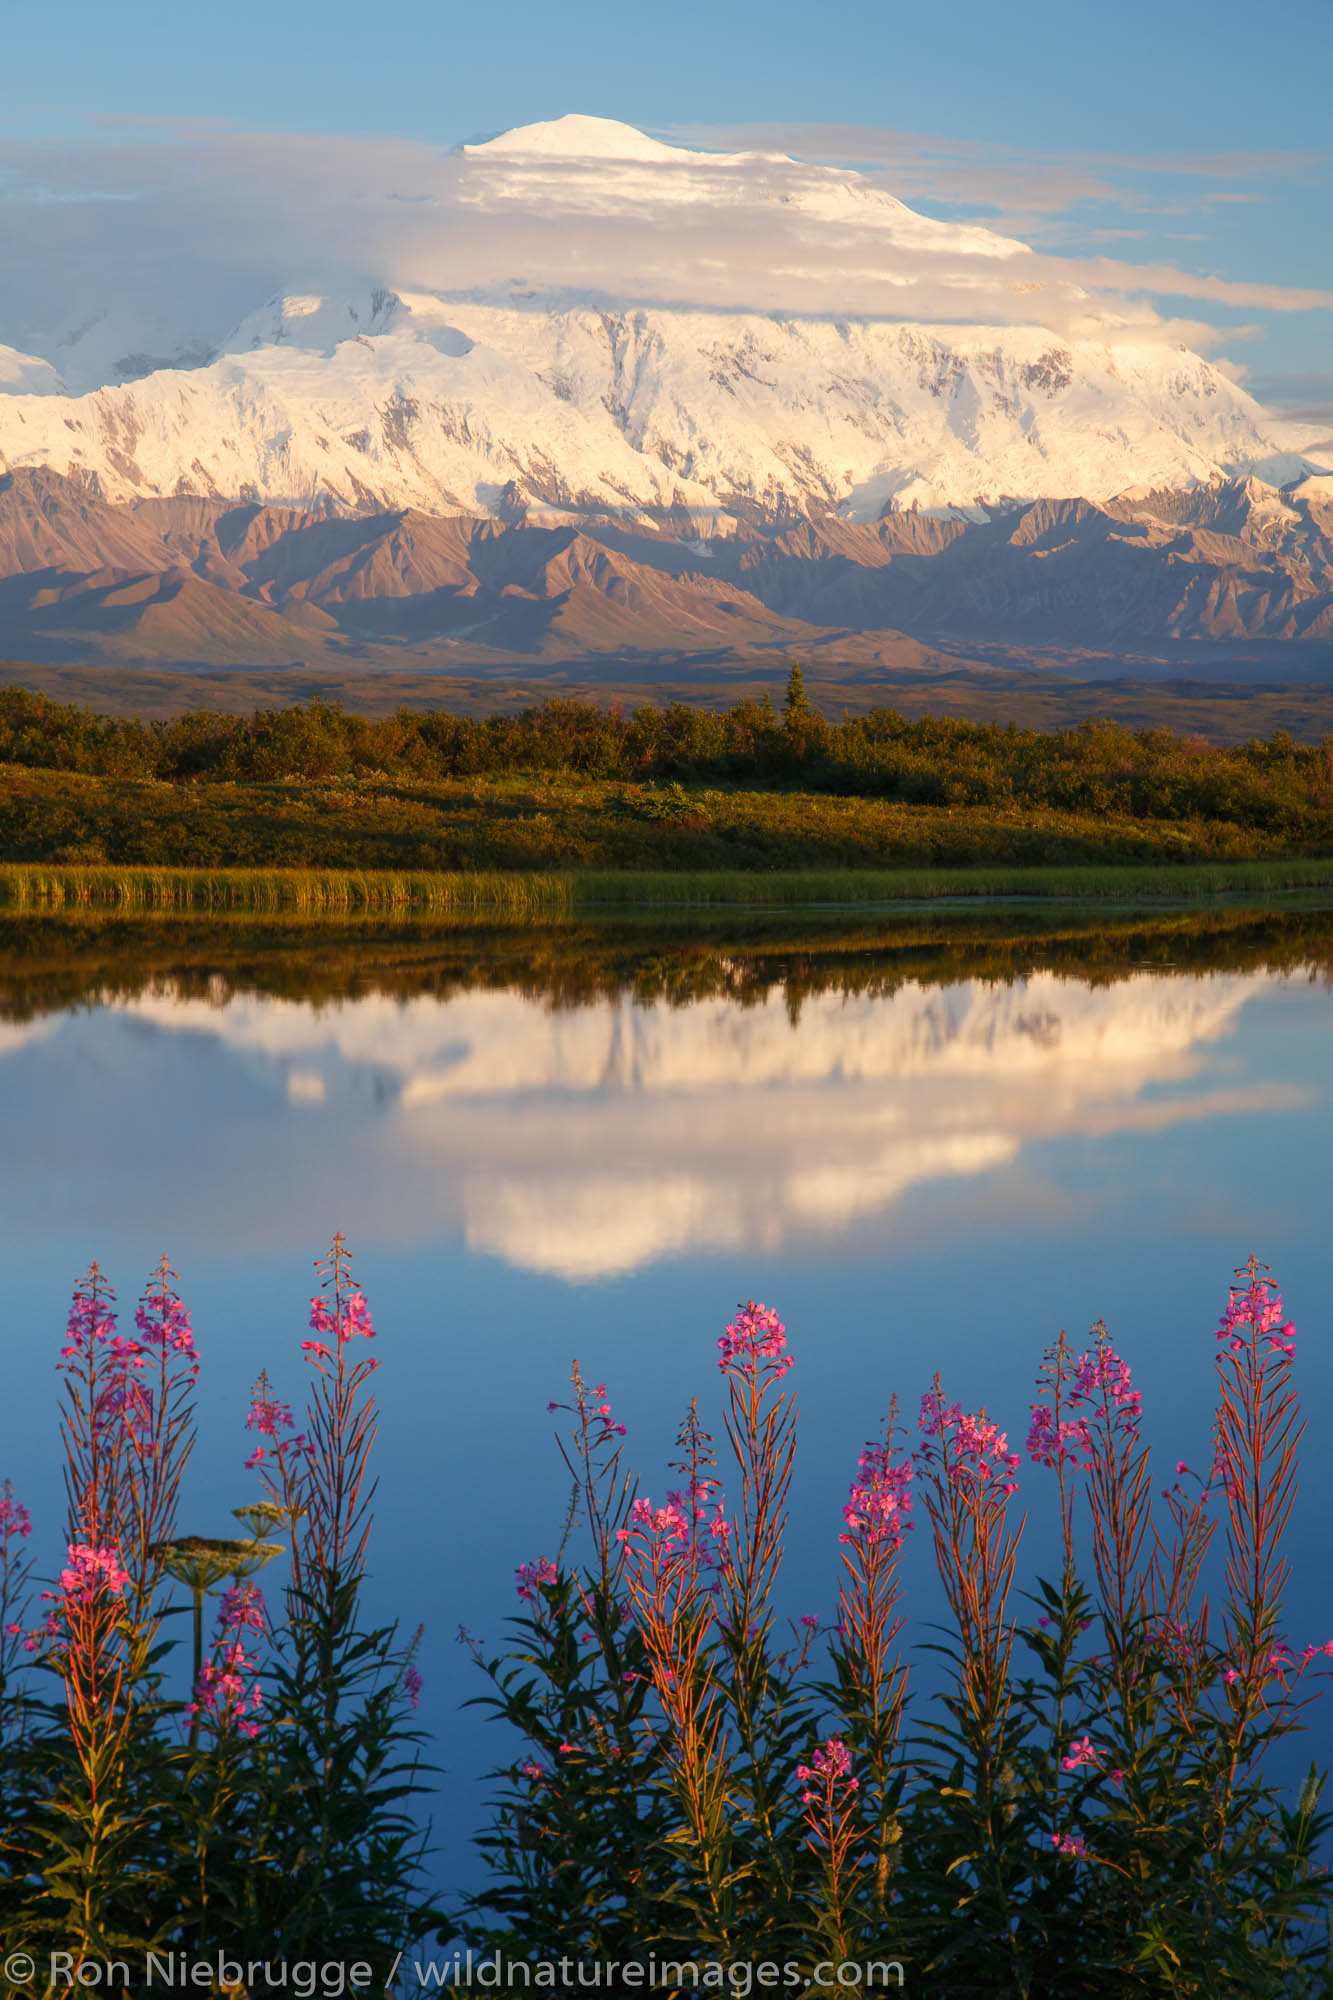 Fireweed and Mt. McKinley, locally known as Denali, at at Reflection Pond, Denali National Park, Alaska.